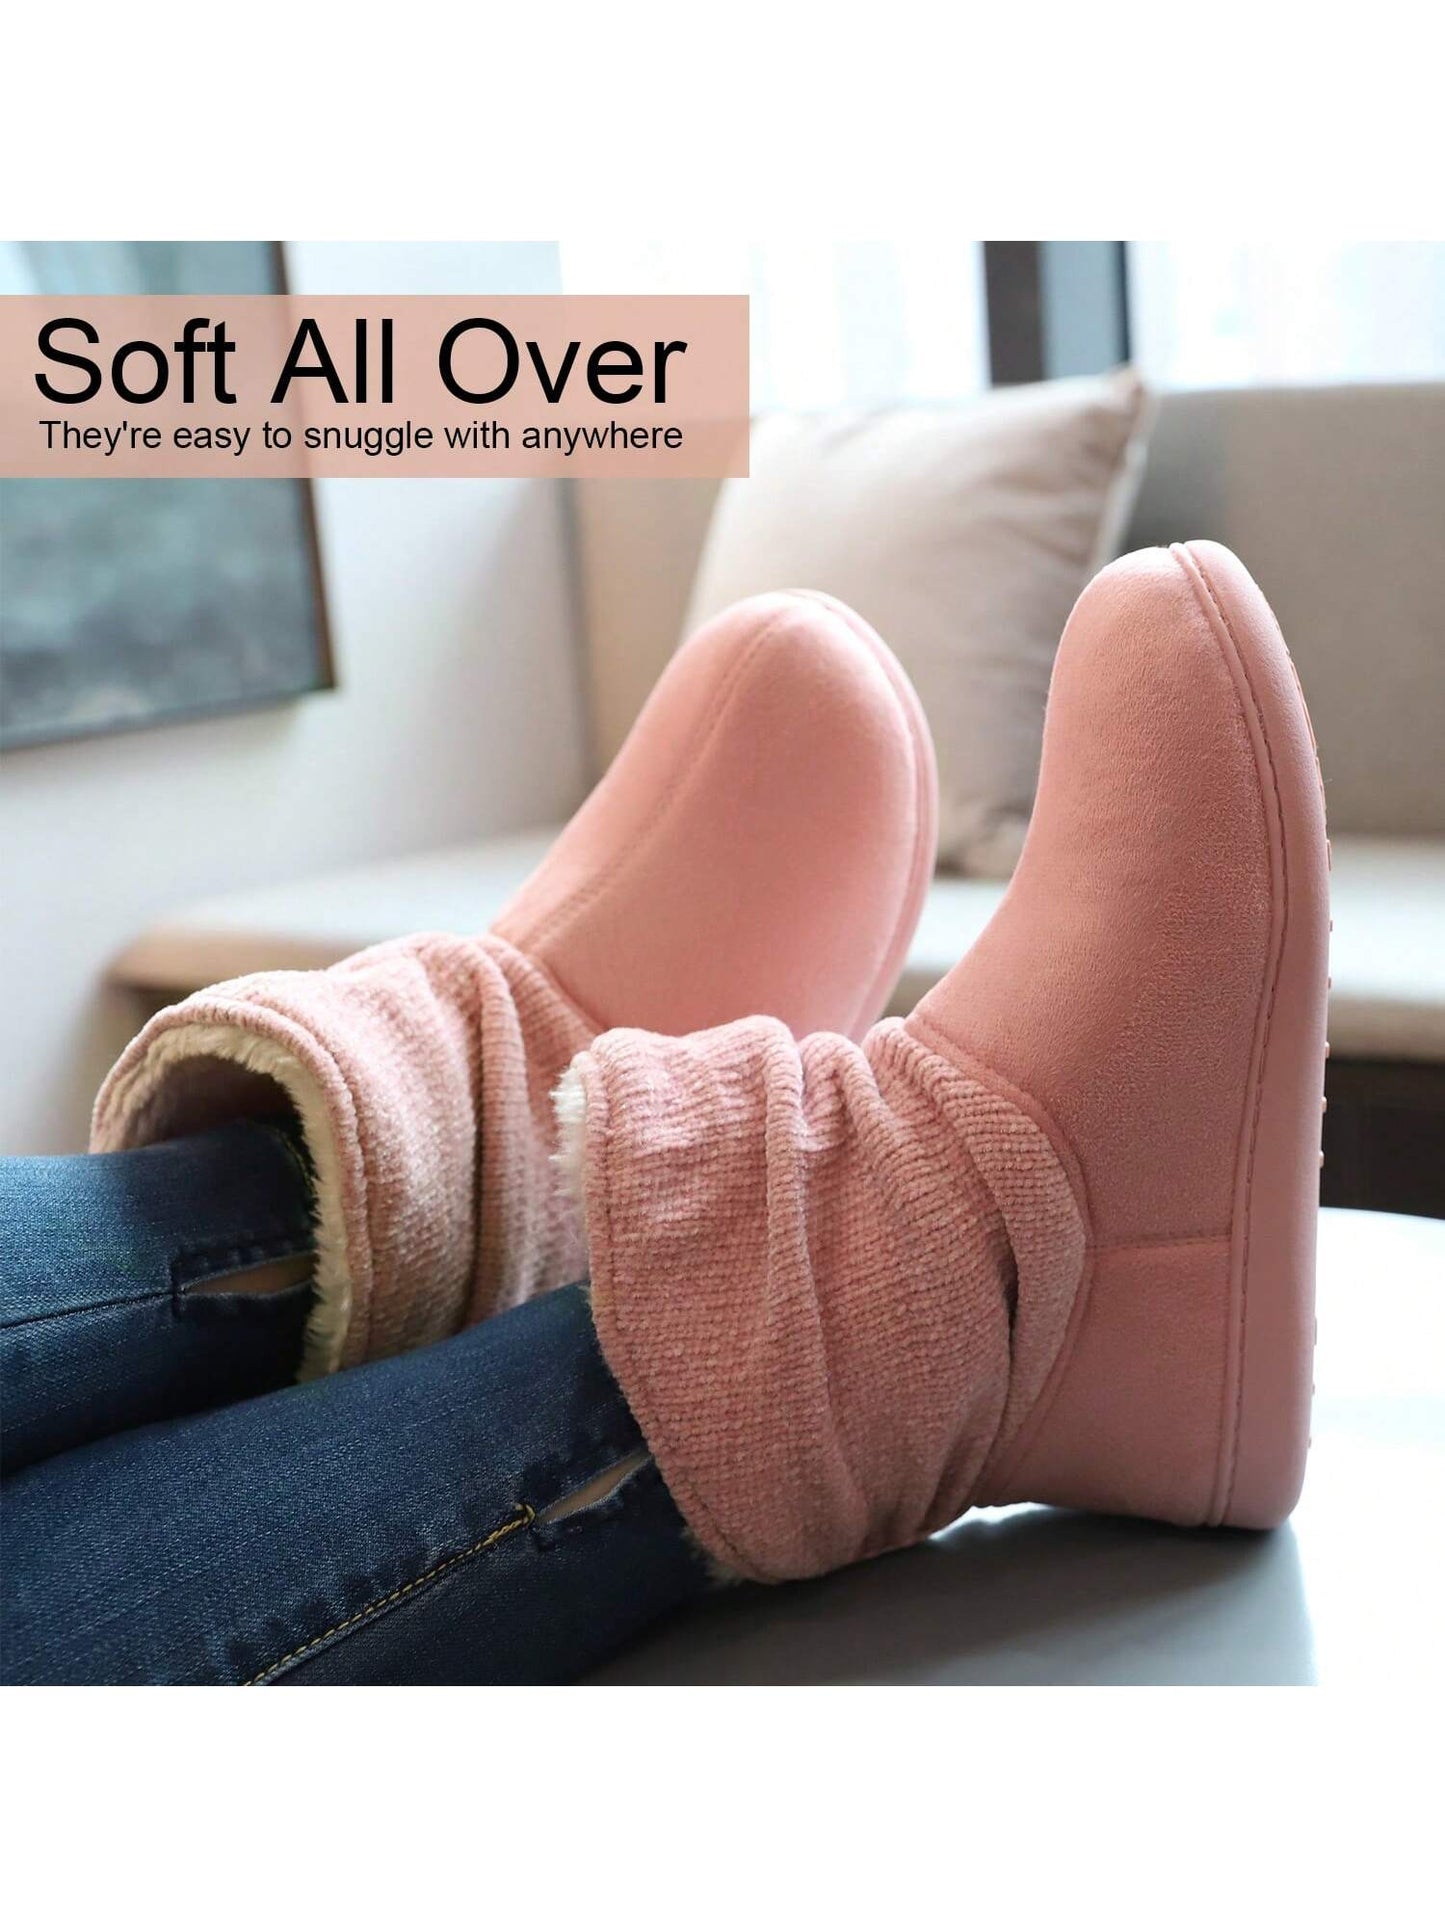 LongBay Ladies' Chenille Knit Warm Boots Slippers Soft Plush Fleece Booties Slipper Memory Foam Women Bootee Slippers House Shoes